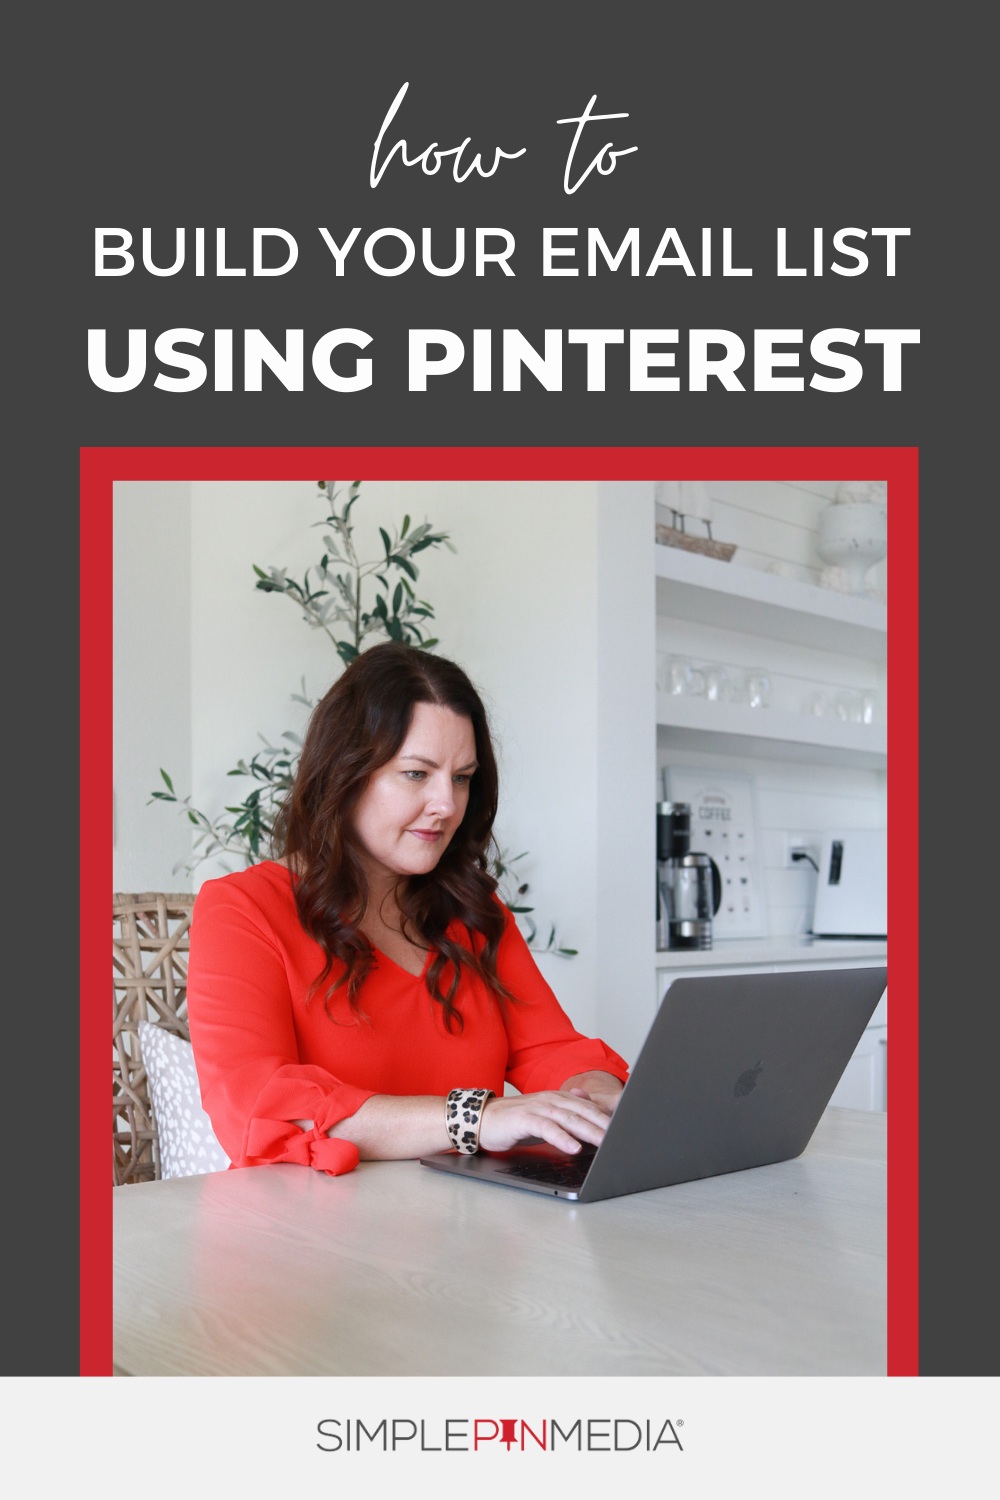 325 – Grow Your Email List With Pinterest